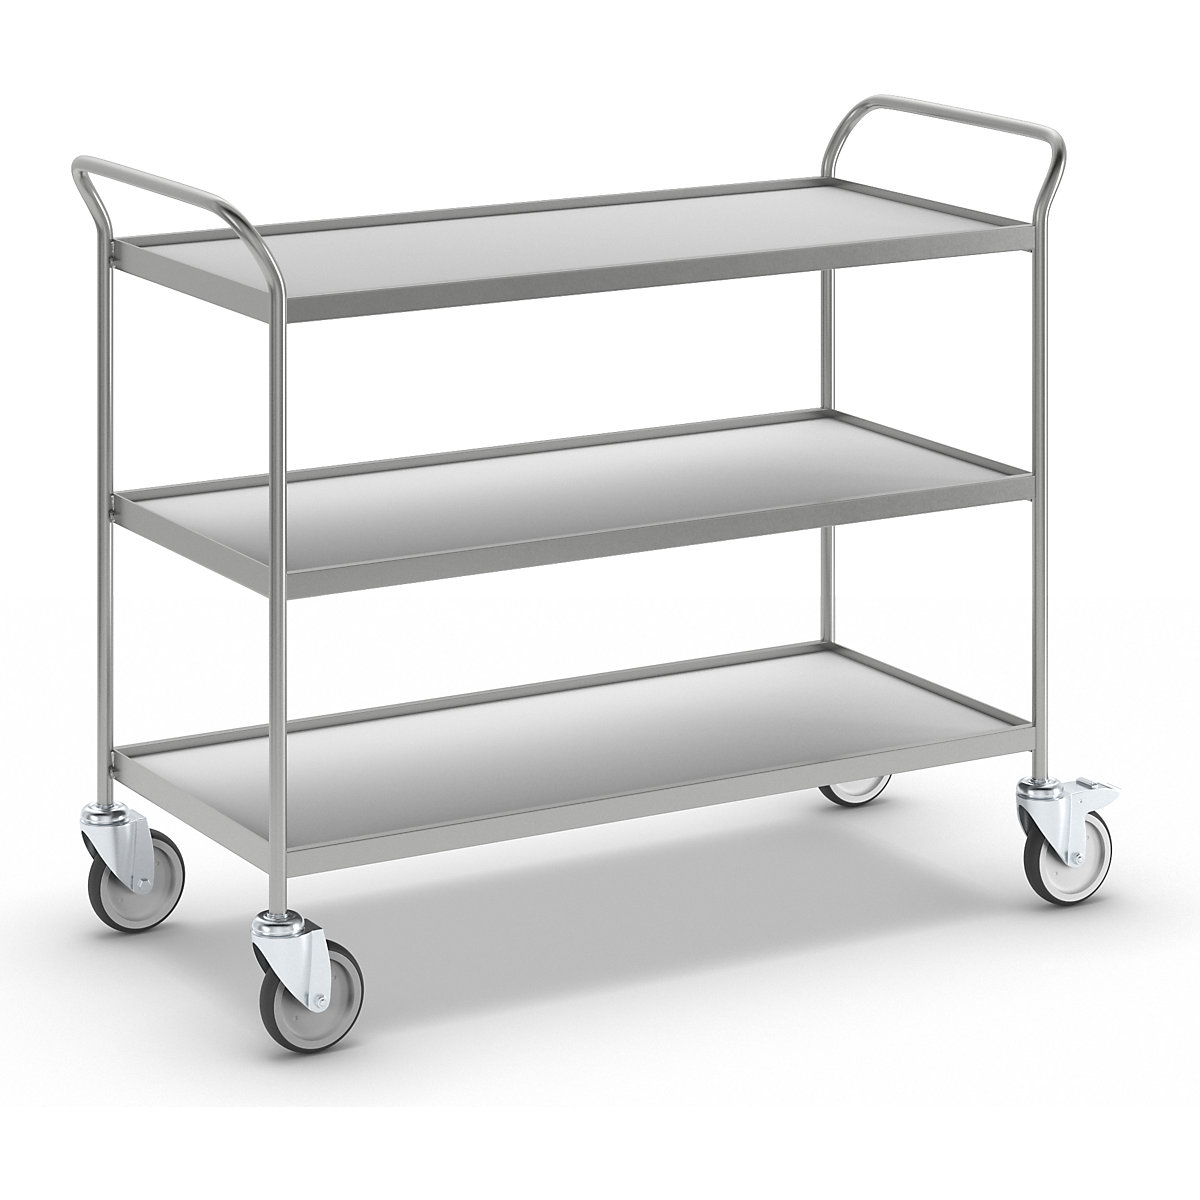 Serving trolley – eurokraft pro, 3 shelves in grey, with 4 swivel castors, 2 with double stops-9